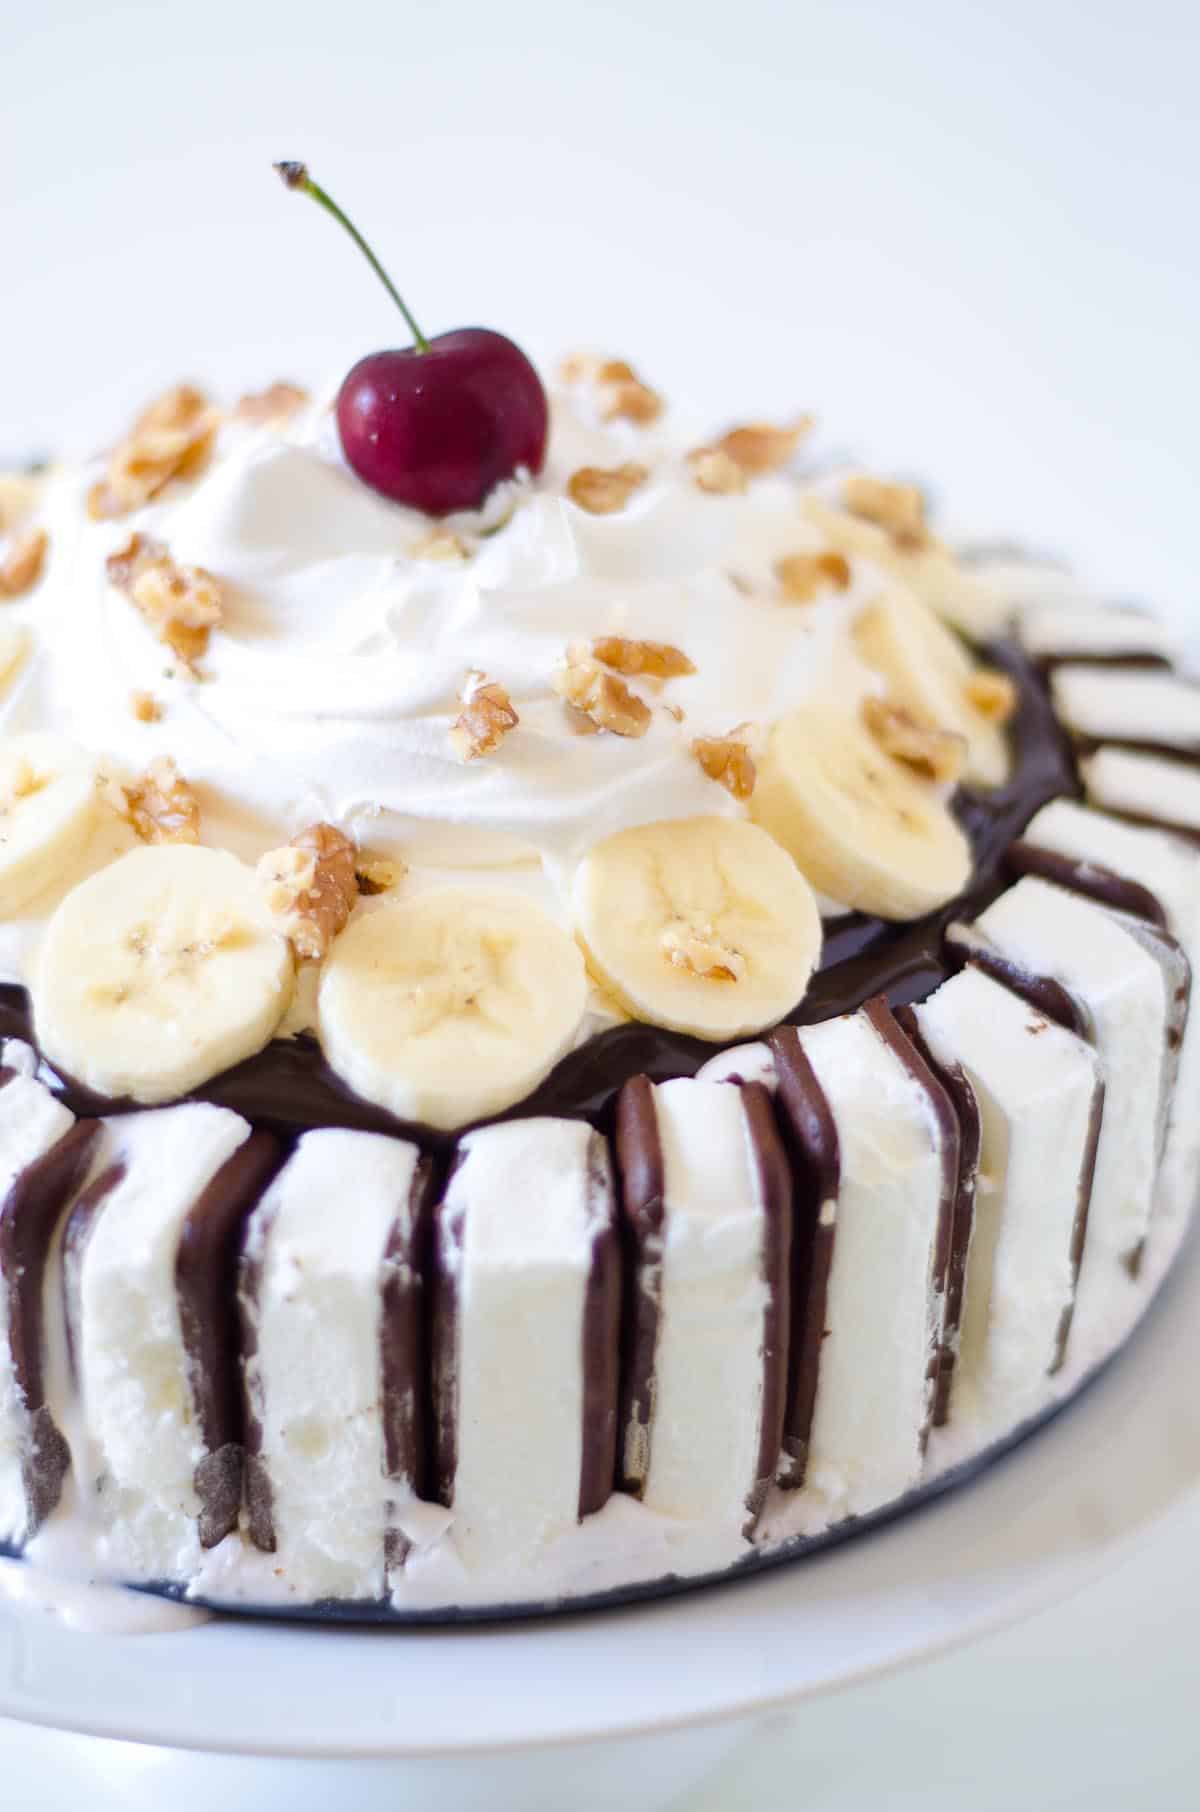 ice cream cake with ice cream sandwiches and bananas and cherry on top